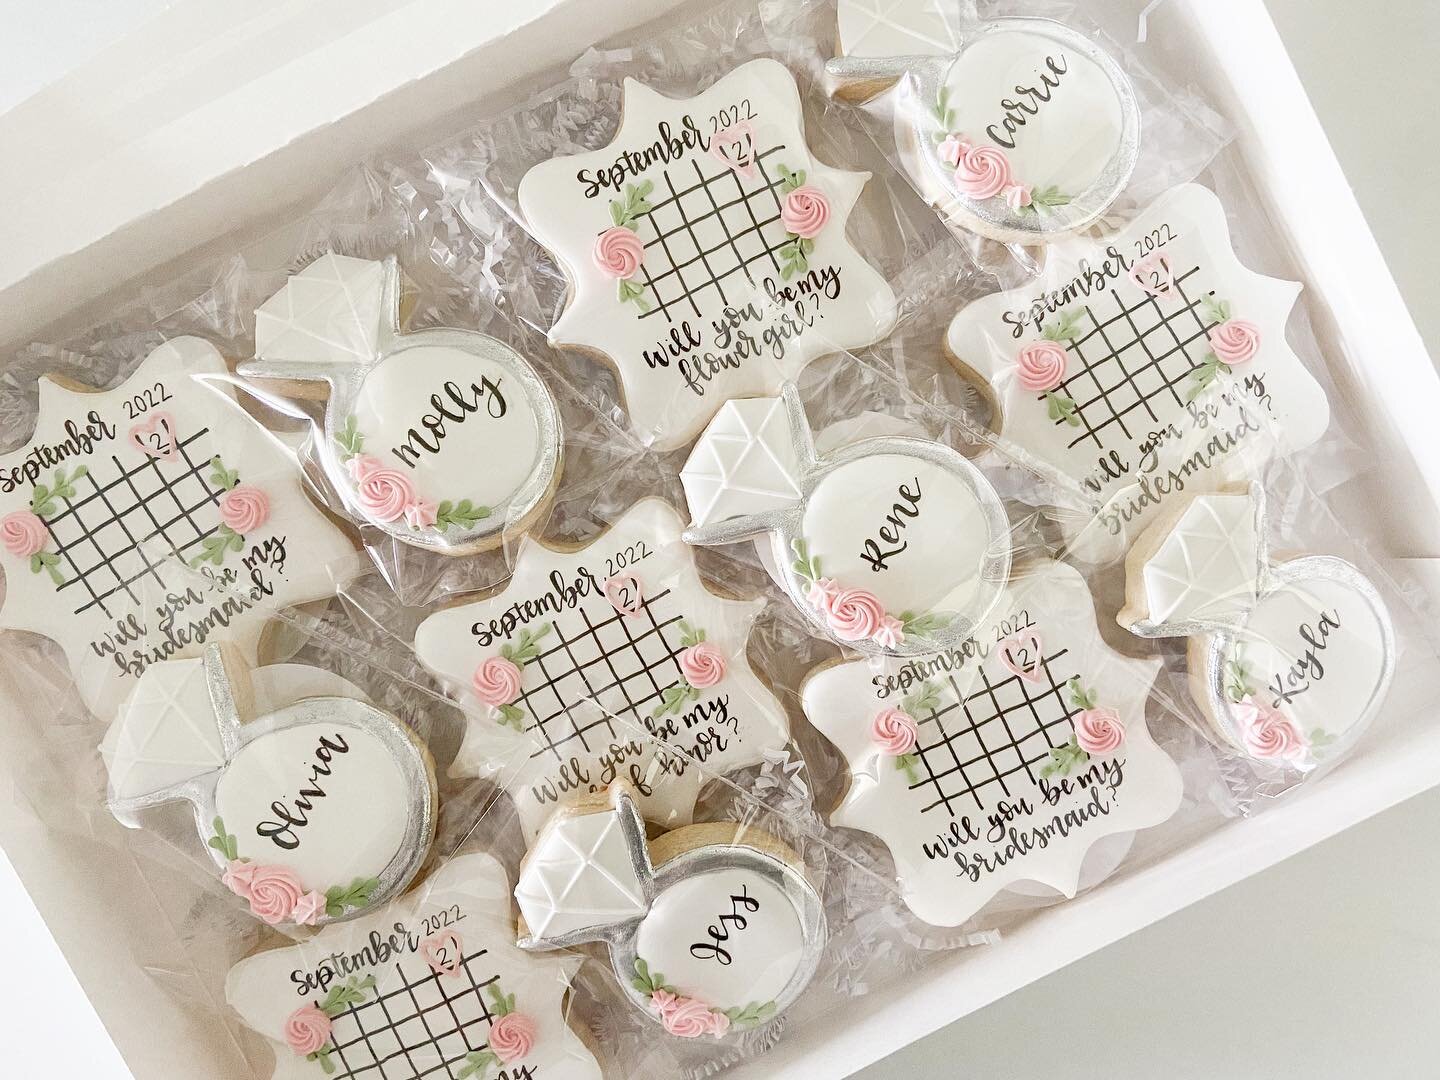 Love me some bridesmaid proposal cookies 🤍

#cookiesofinstagram #sugarcookiesofinstagram #sugarcookies #bridalcookies #weddingcookies #floralcookies #sweetashcookieswv